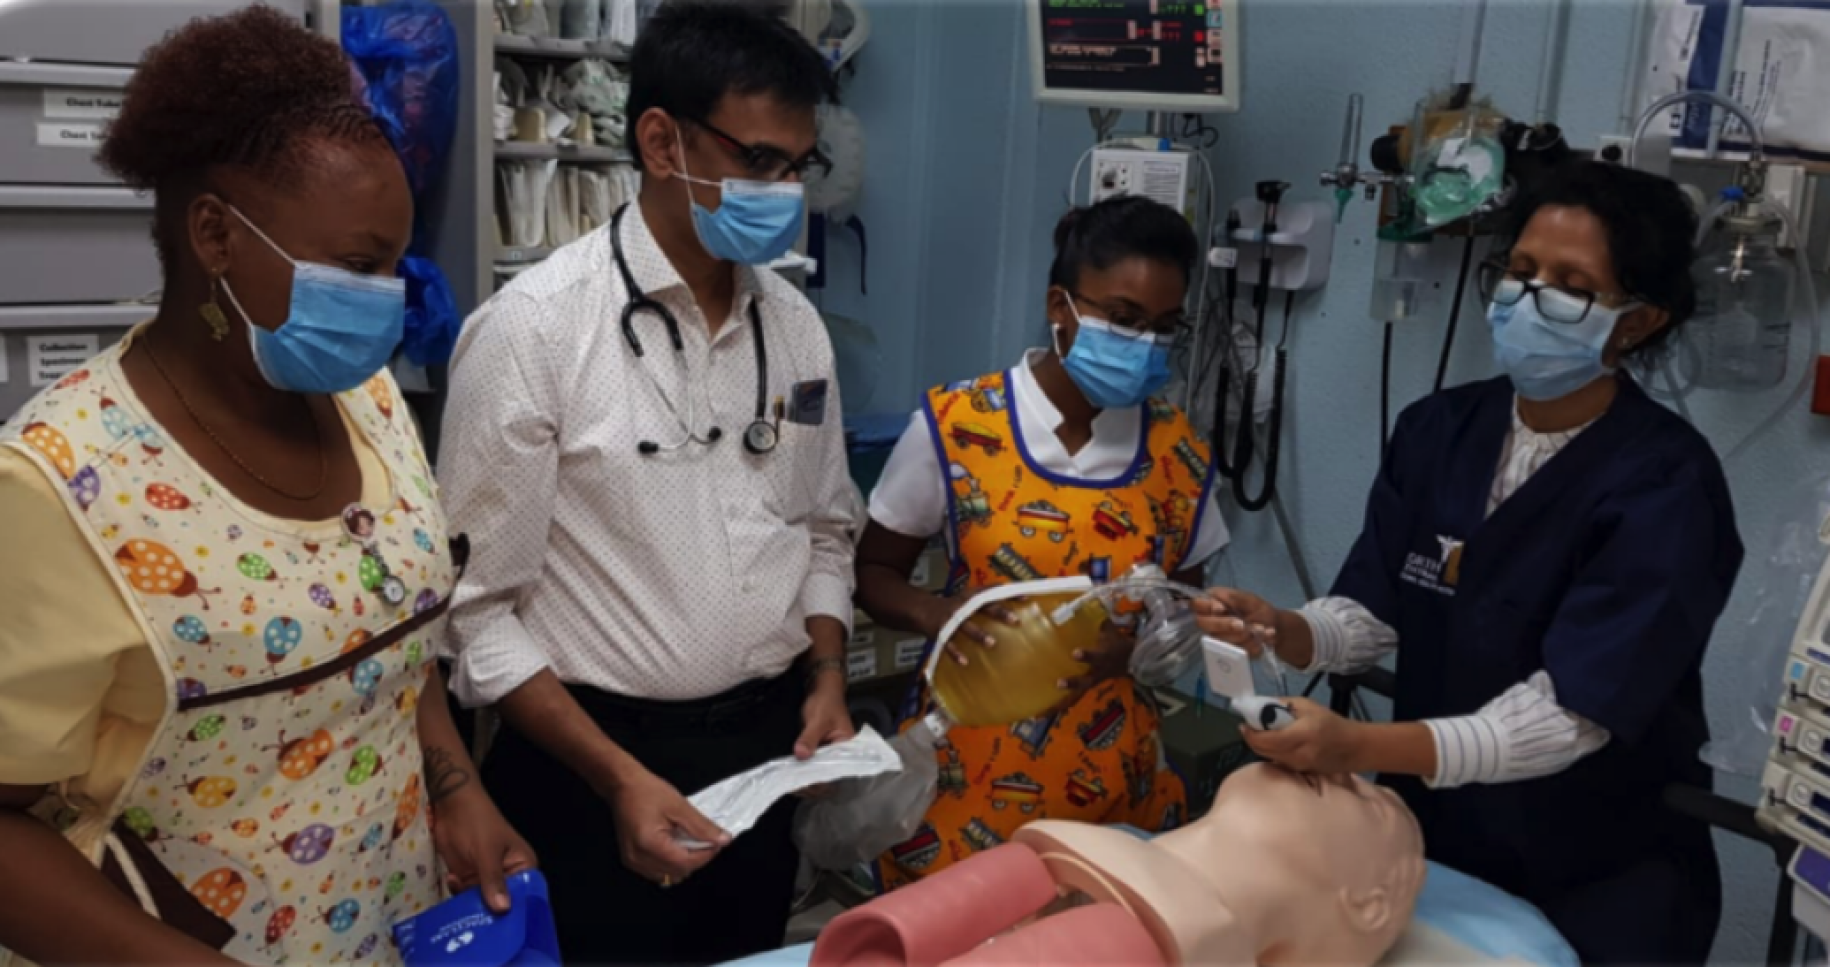 The image shows healthcare workers testing new lifesaving supplies procured by UNDP.